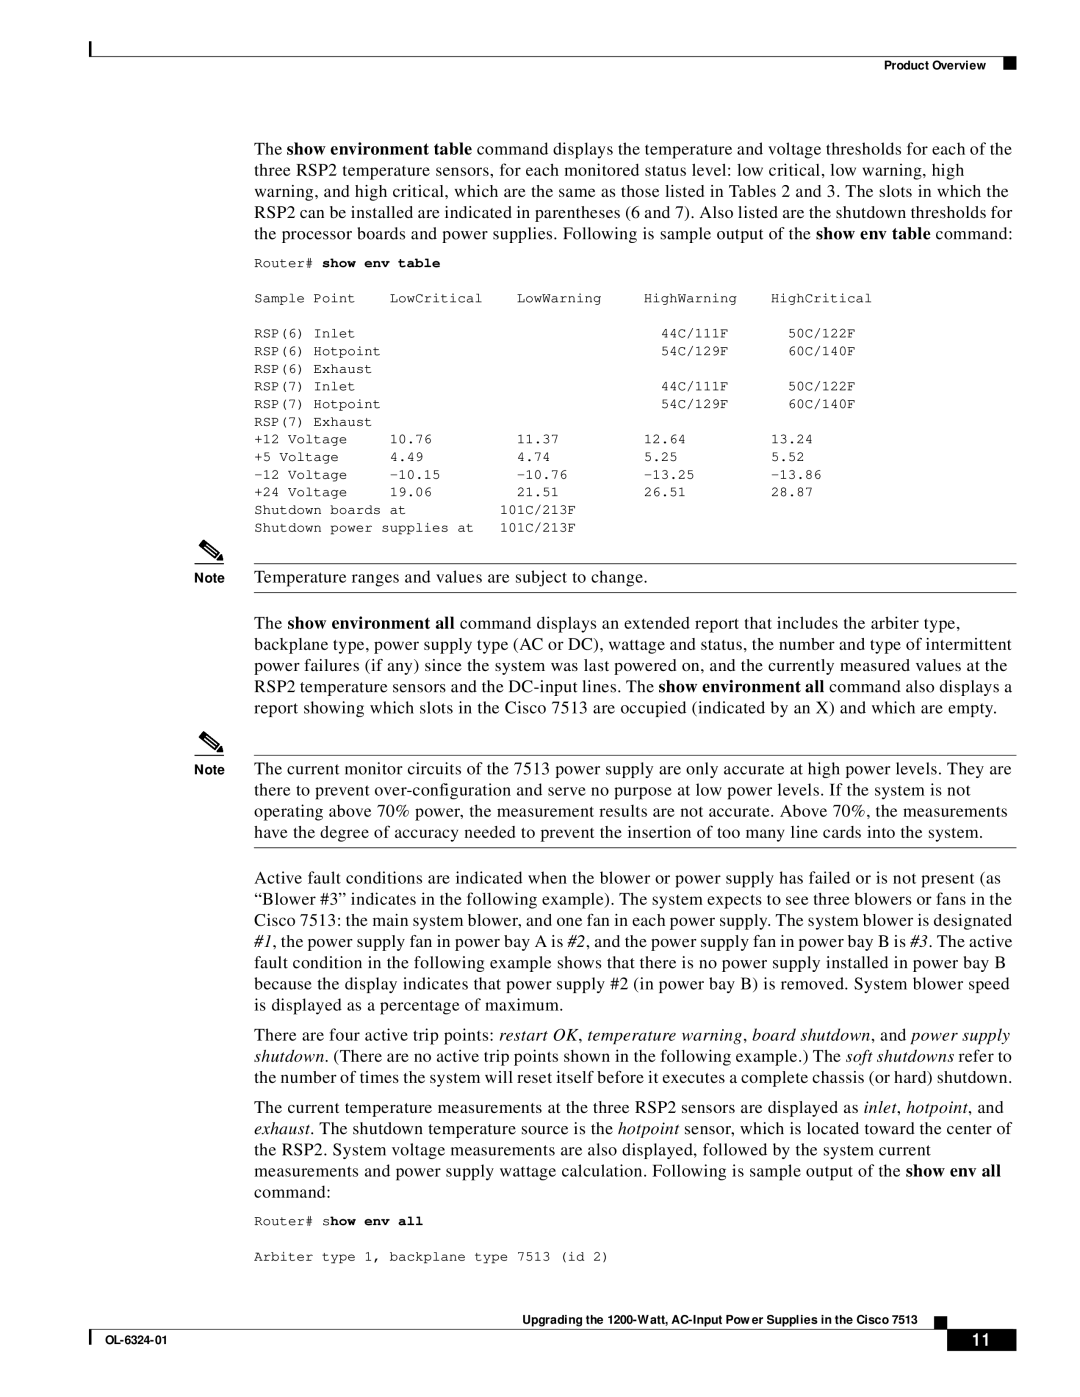 Cisco Systems 7513 manual Note Temperature ranges and values are subject to change 